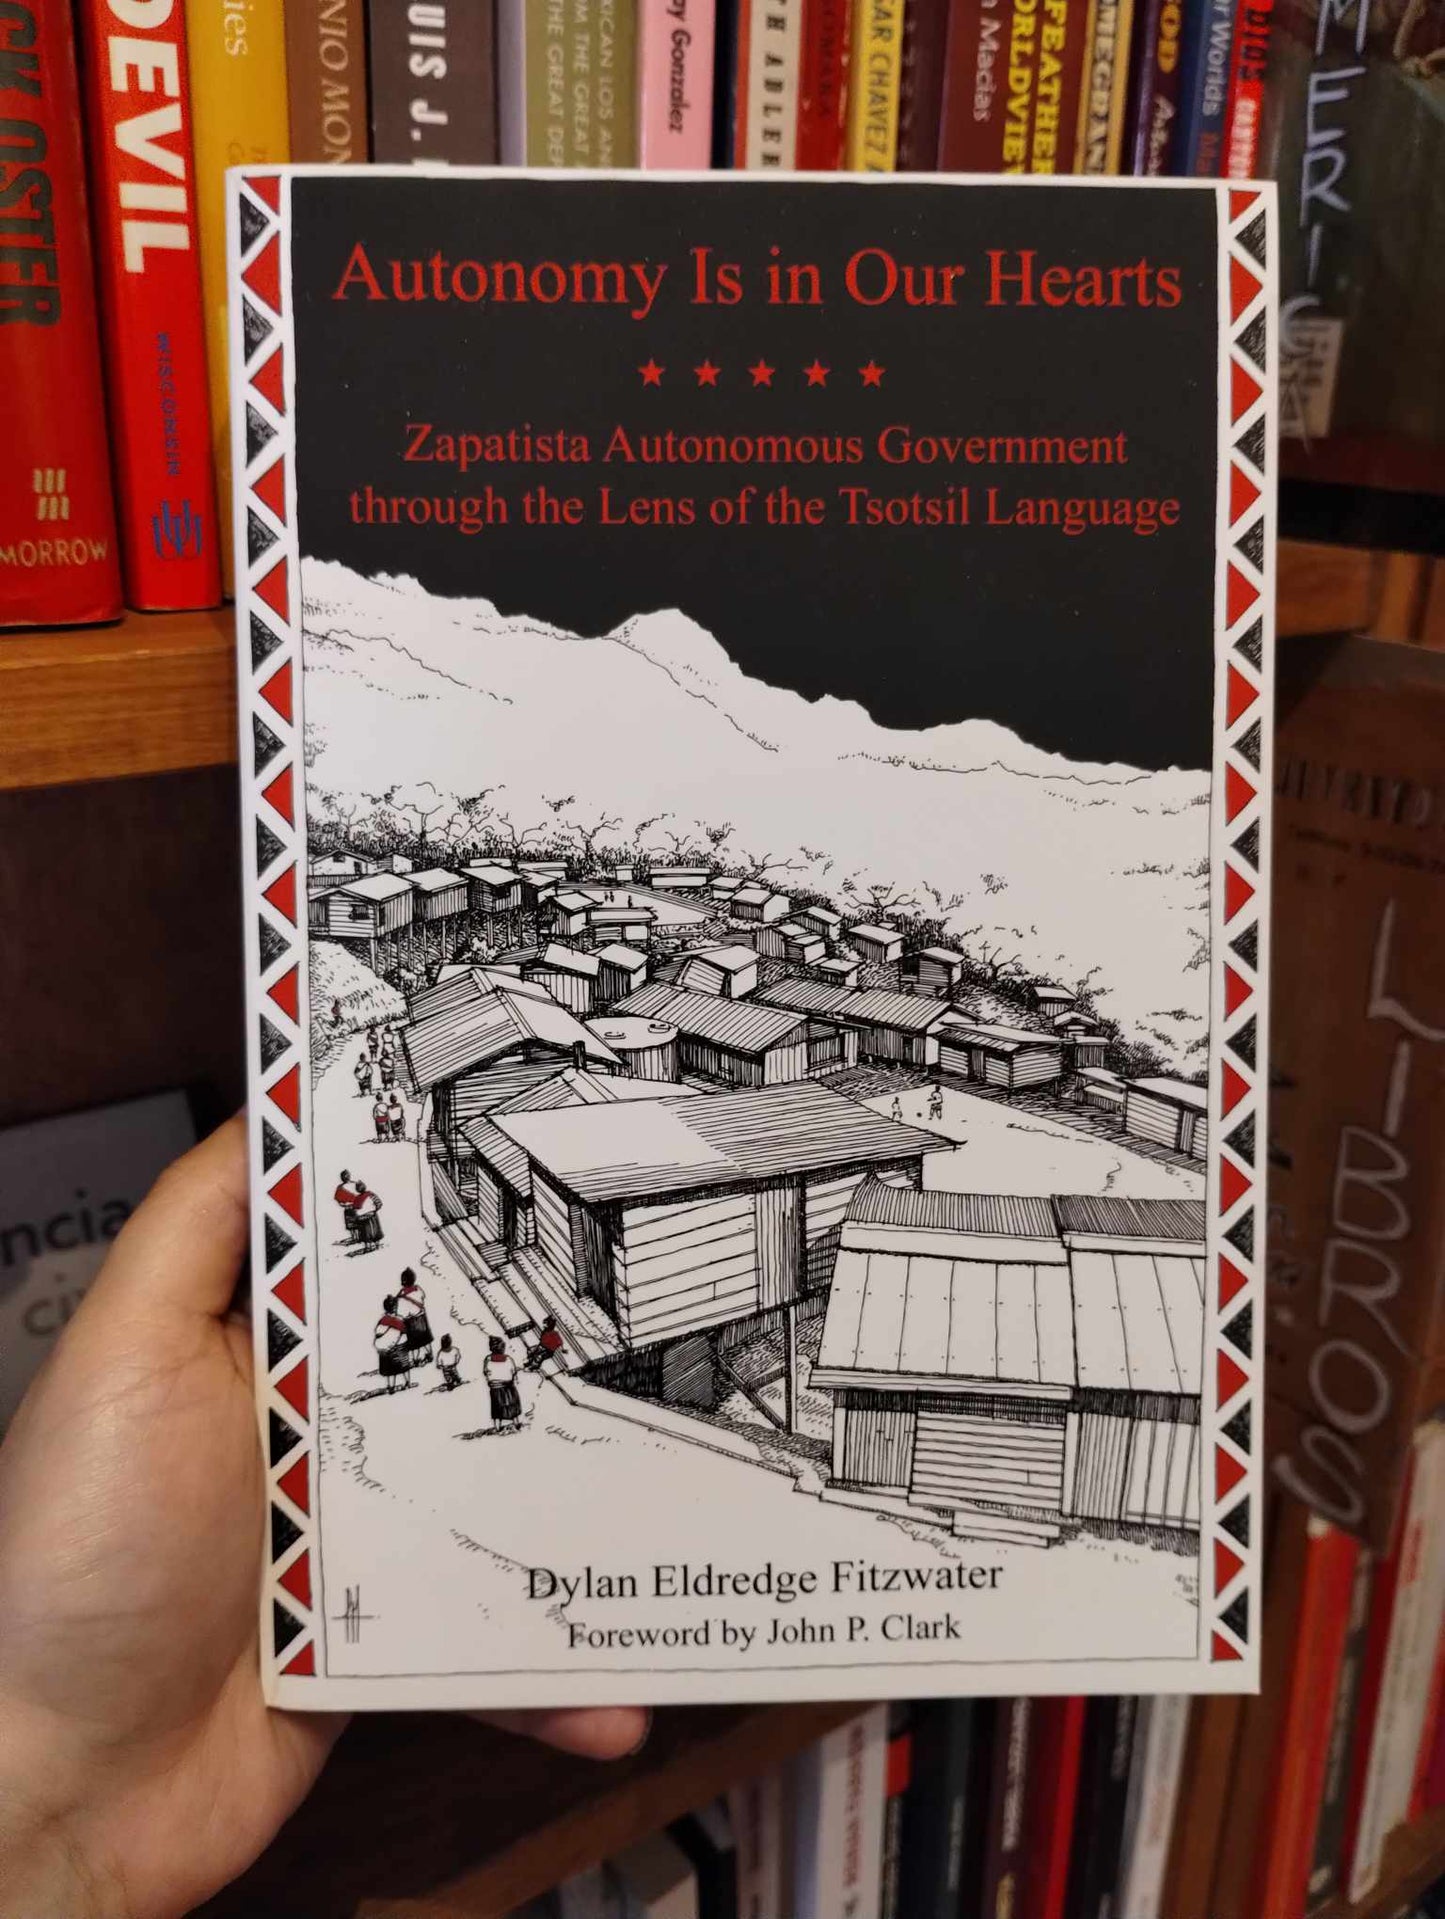 Autonomy Is in Our Hearts: Zapatista Autonomous Government through the Lens of the Tsotsil Language